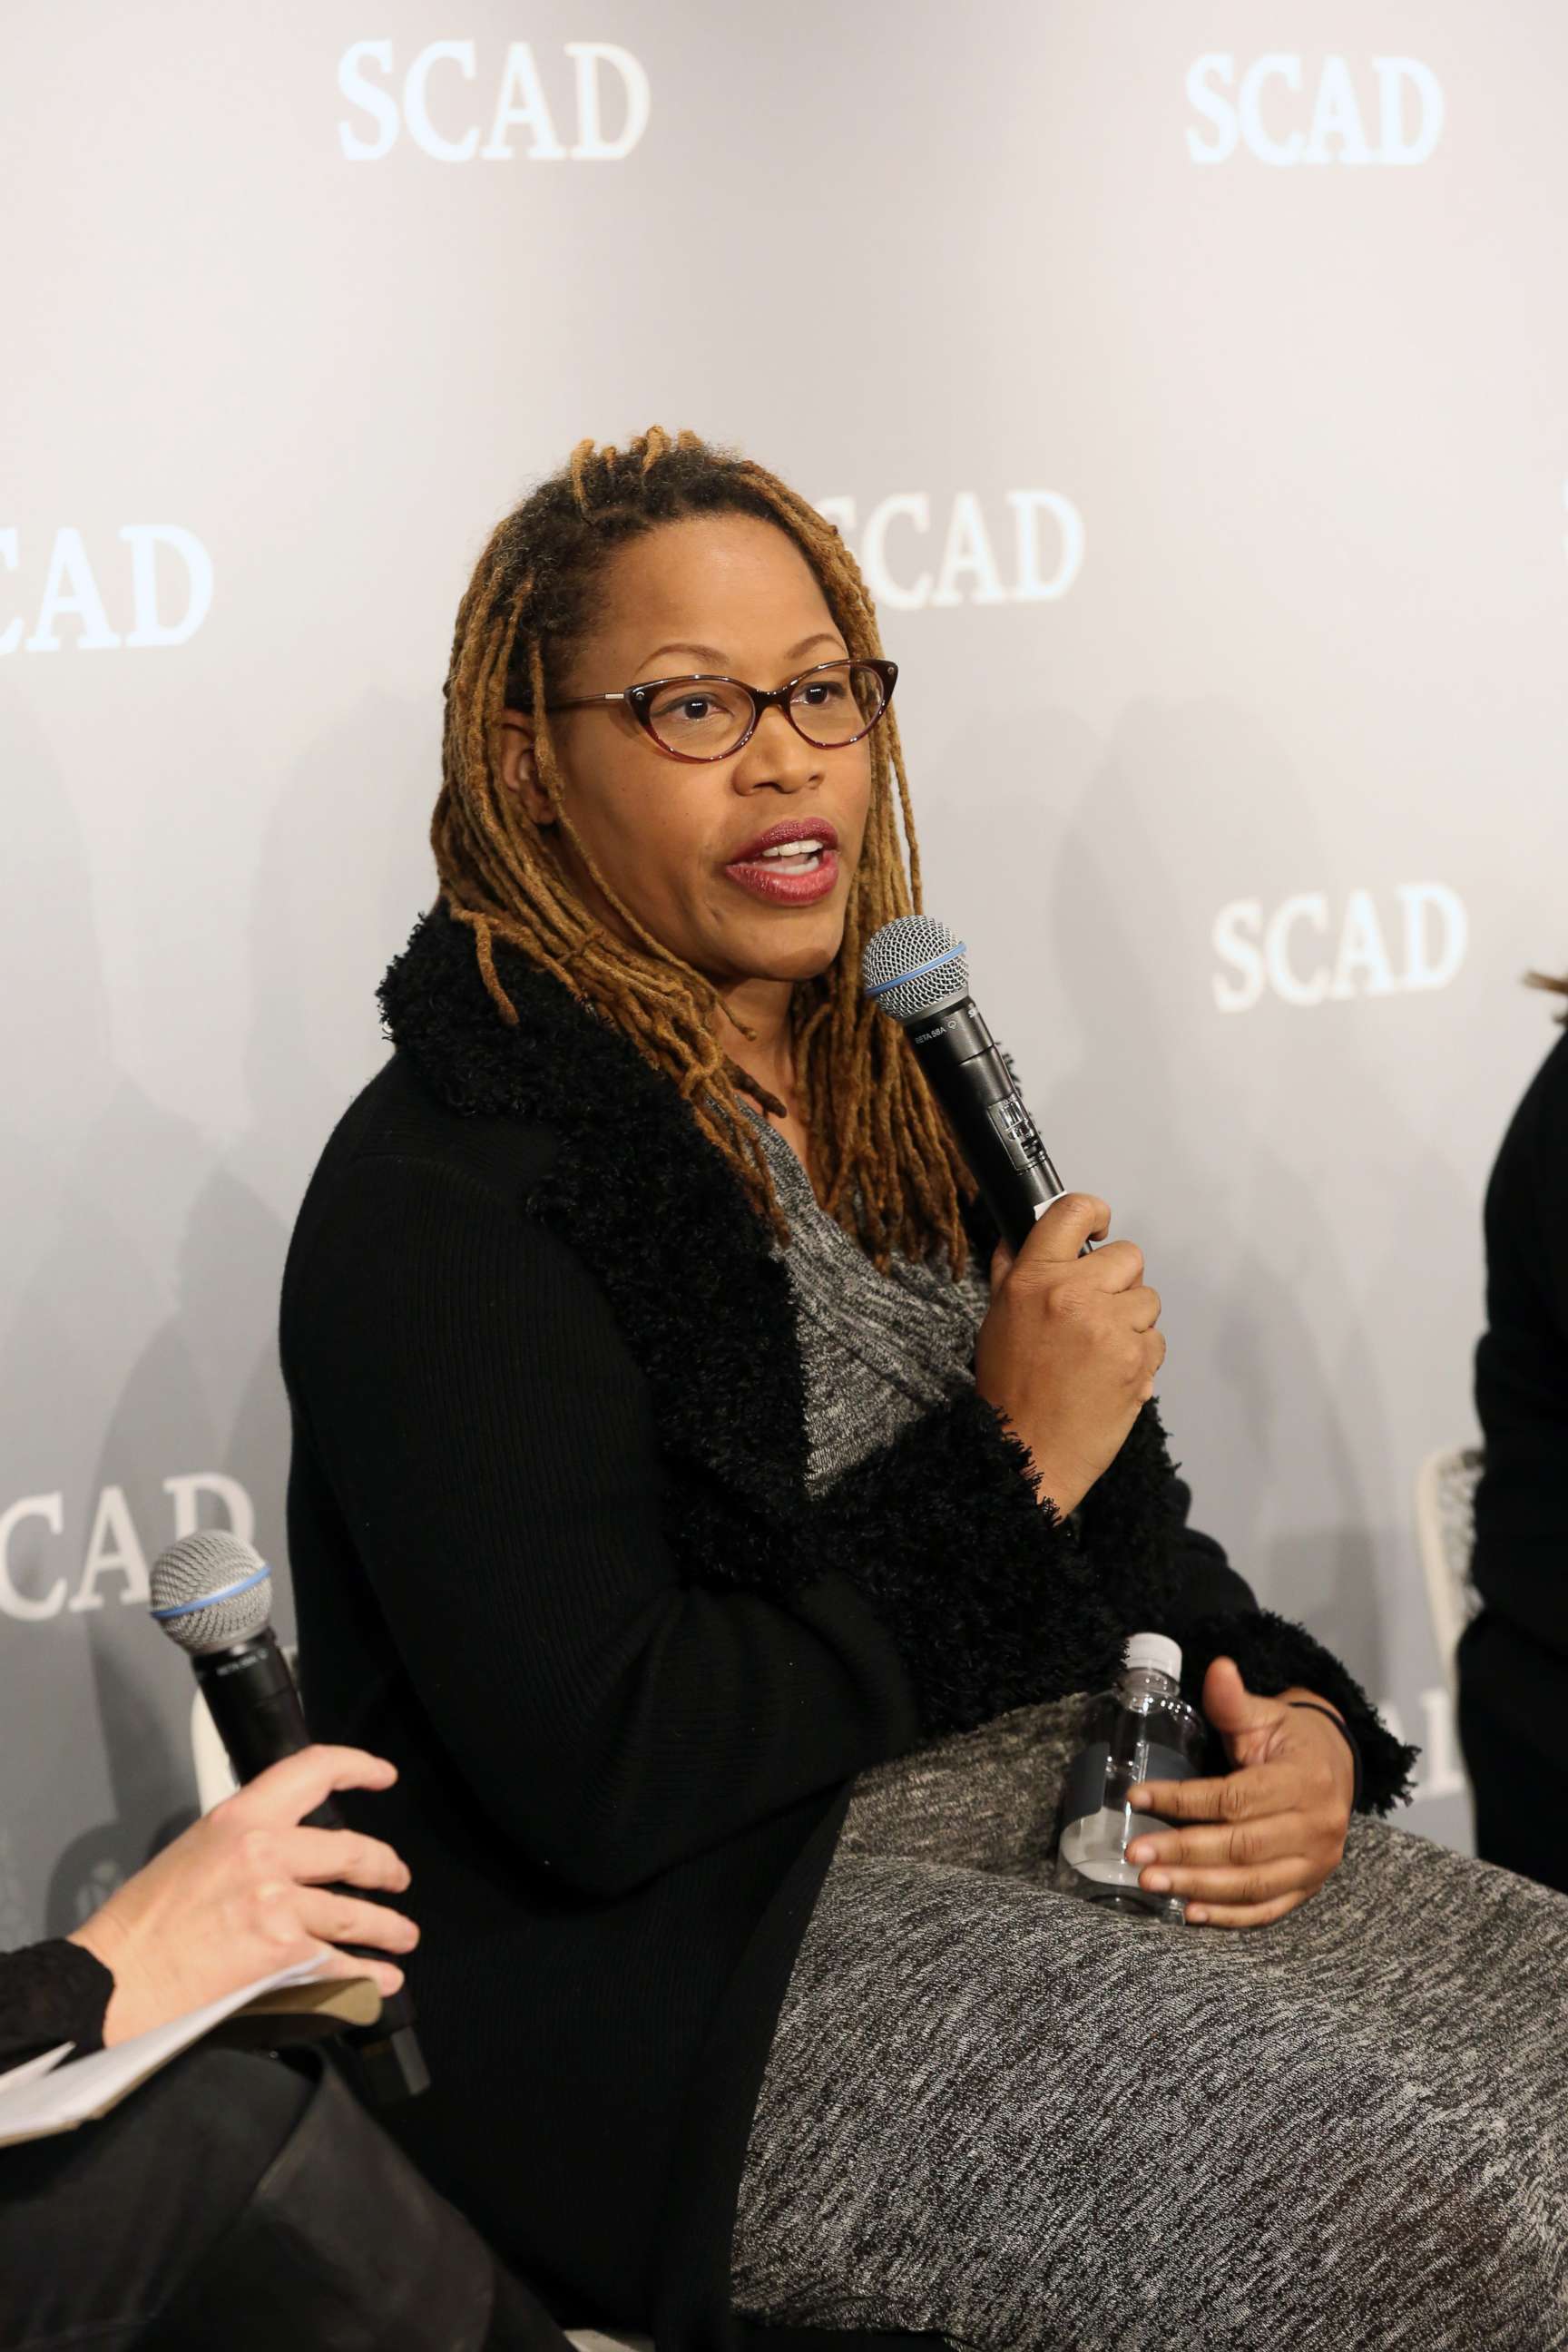 PHOTO: Writer and producer Zoanne Clack speaks on stage during an event in Atlanta, Feb. 6, 2016.